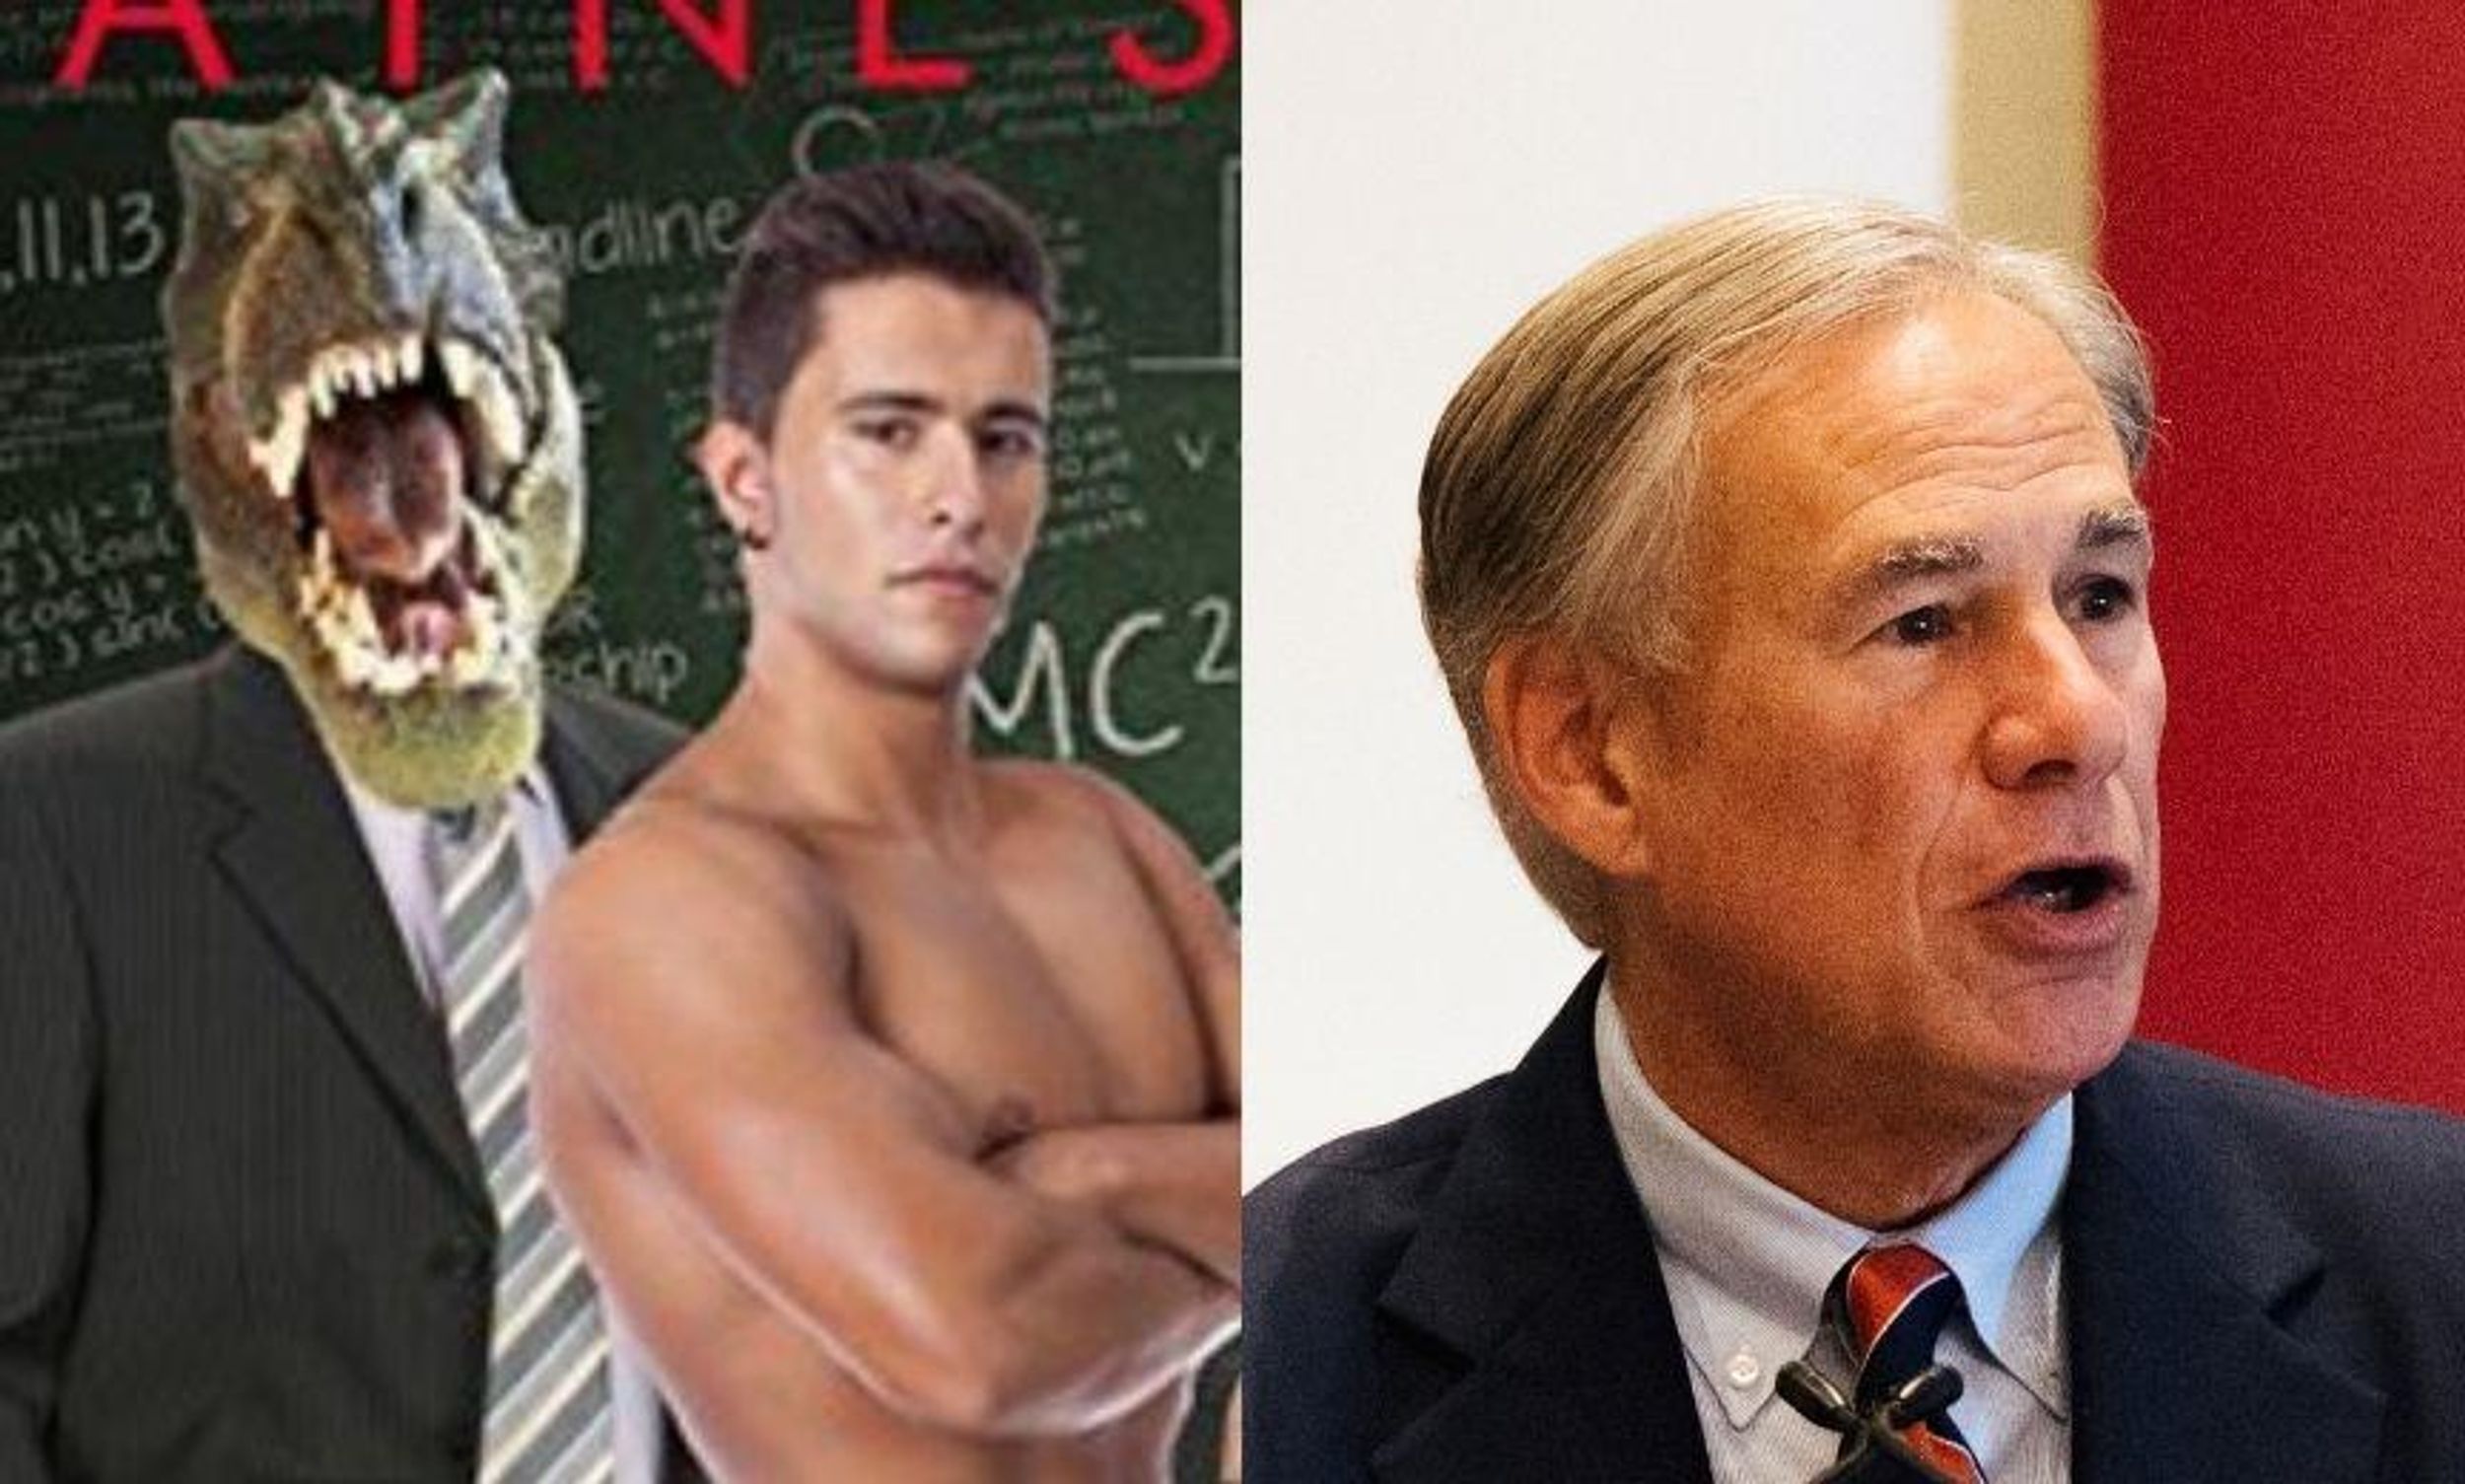 Gay Dinosaur Erotica Author Hilariously Trolls TX Governor With Web Domain Purchase